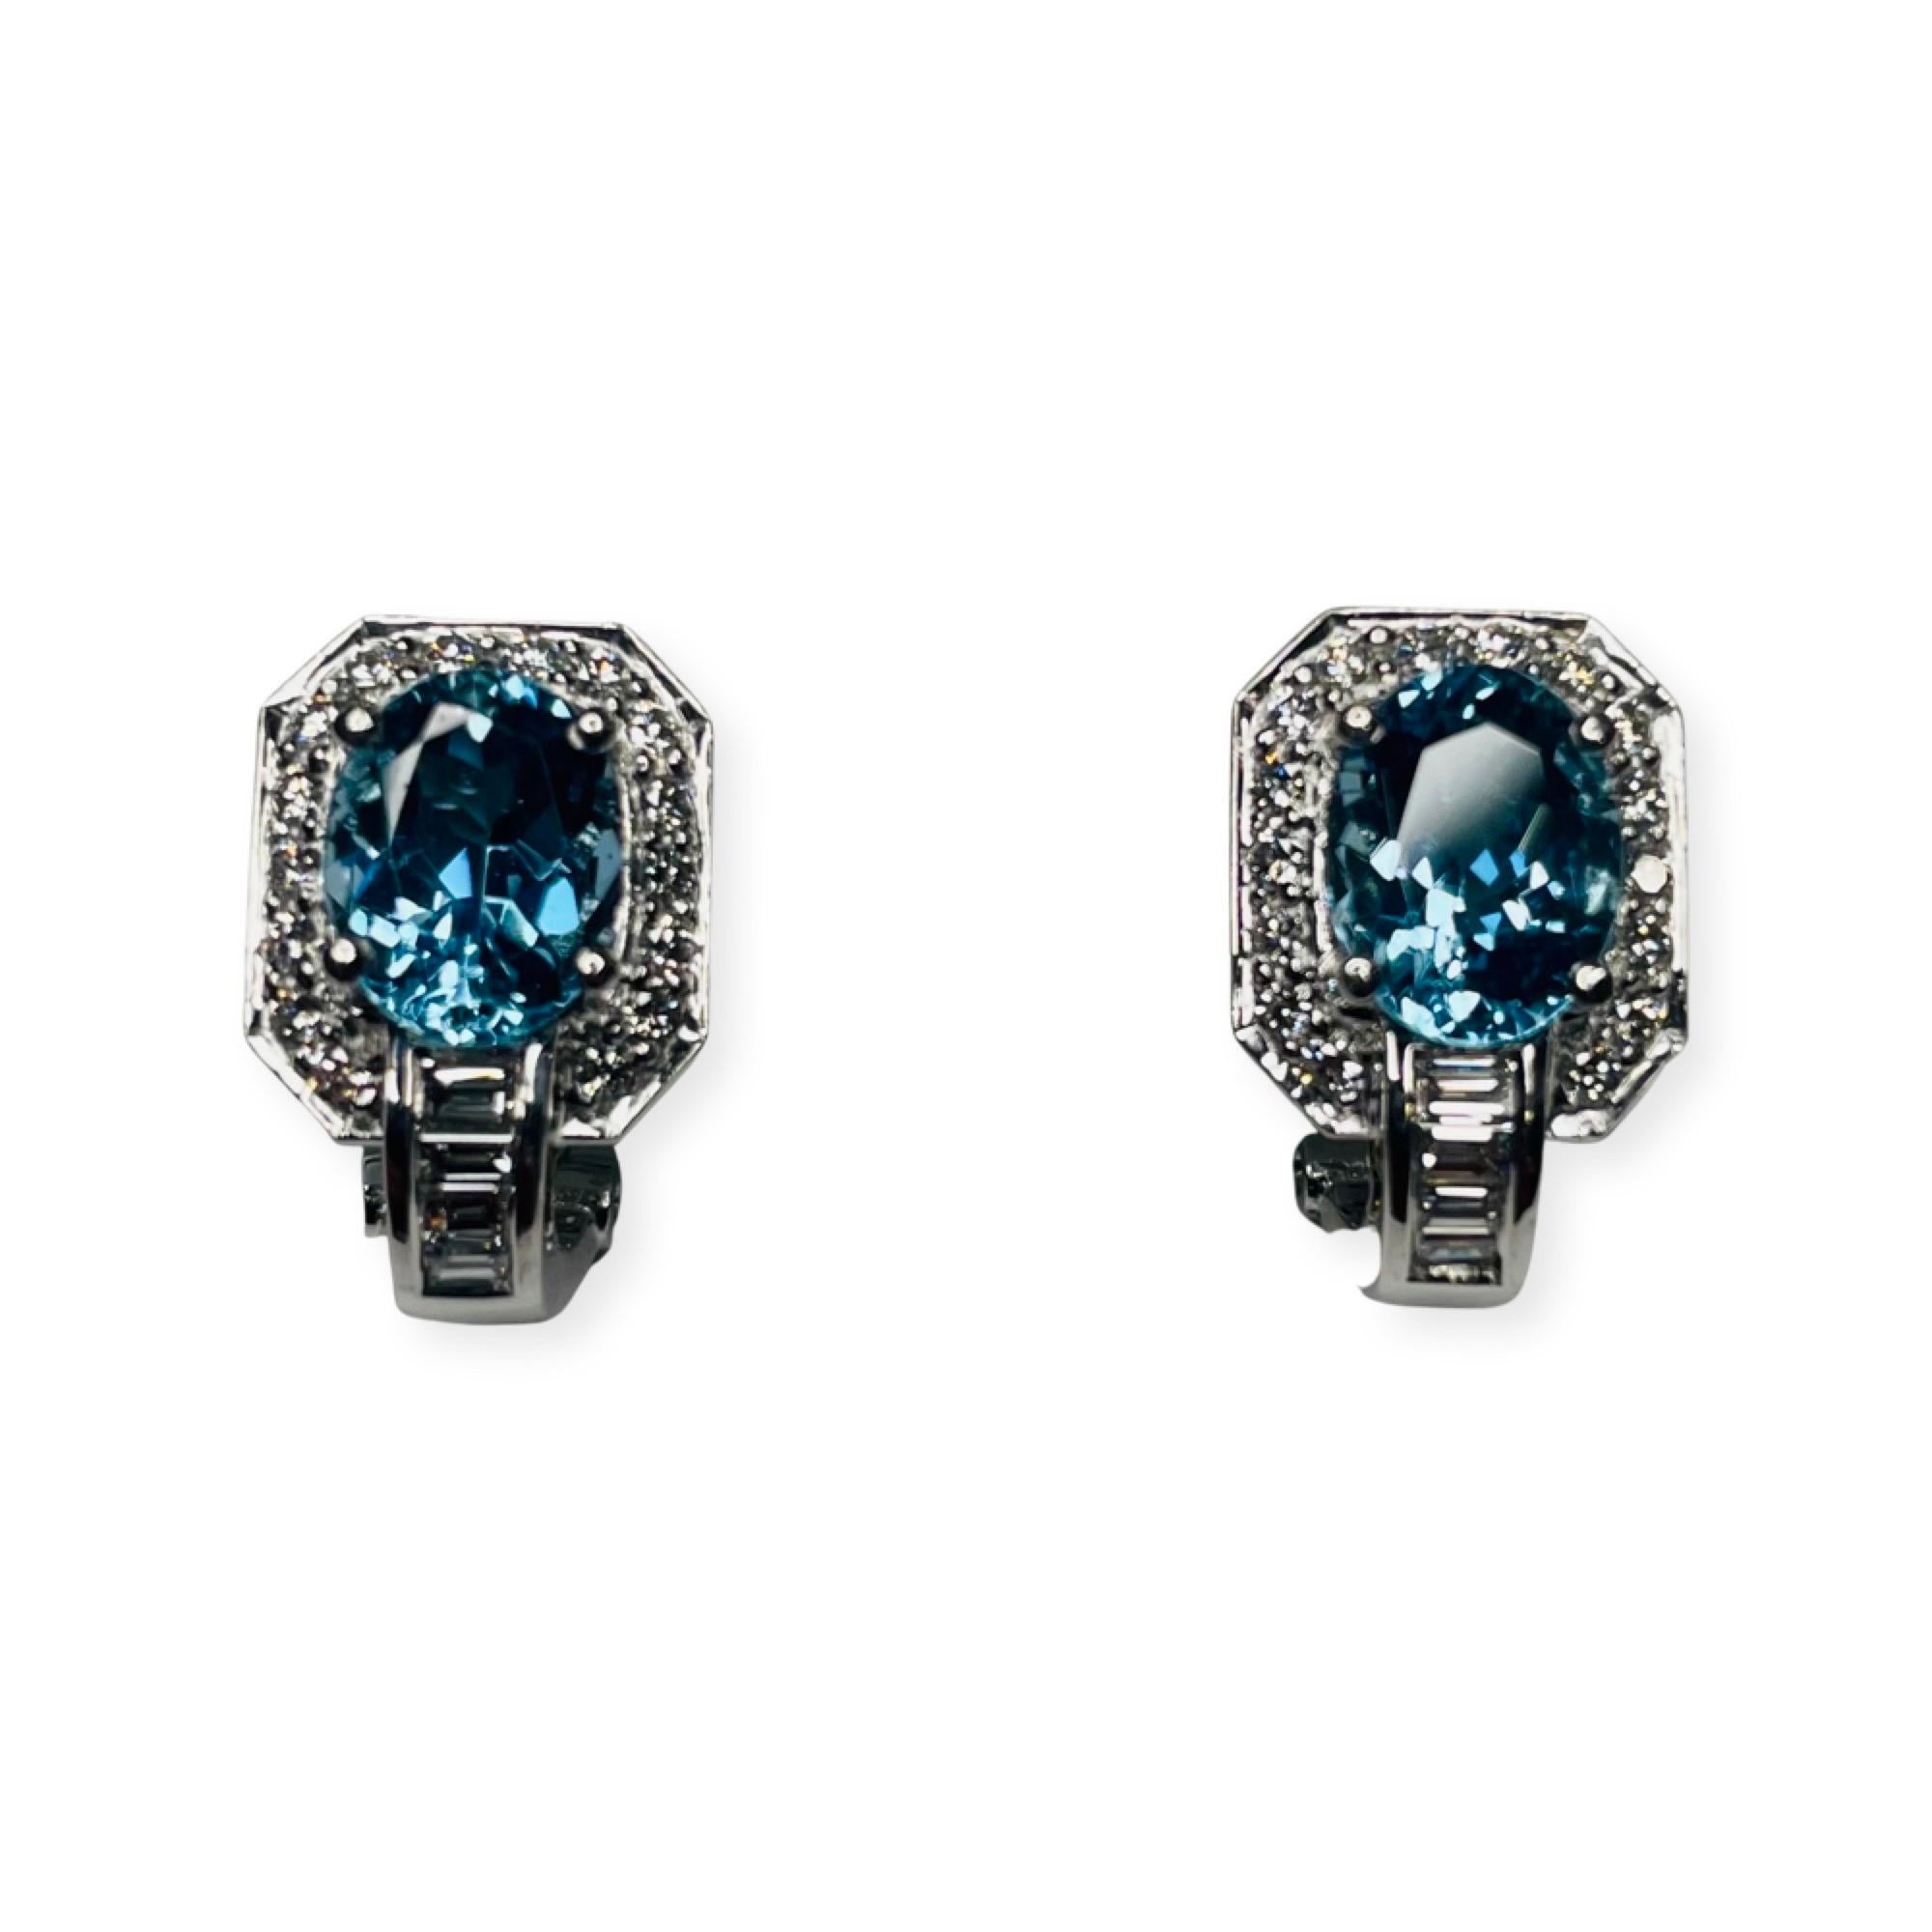 Simon G 18K White and Yellow Gold Aquamarine and Diamond Earrings. The earrings measure 17.25 mm x 11.0 mm. The natural aquamarines measure 9.5mm x 7.0 mm. They have a total weight of 3.54 carats. They are prong set. There are 16 full cut round